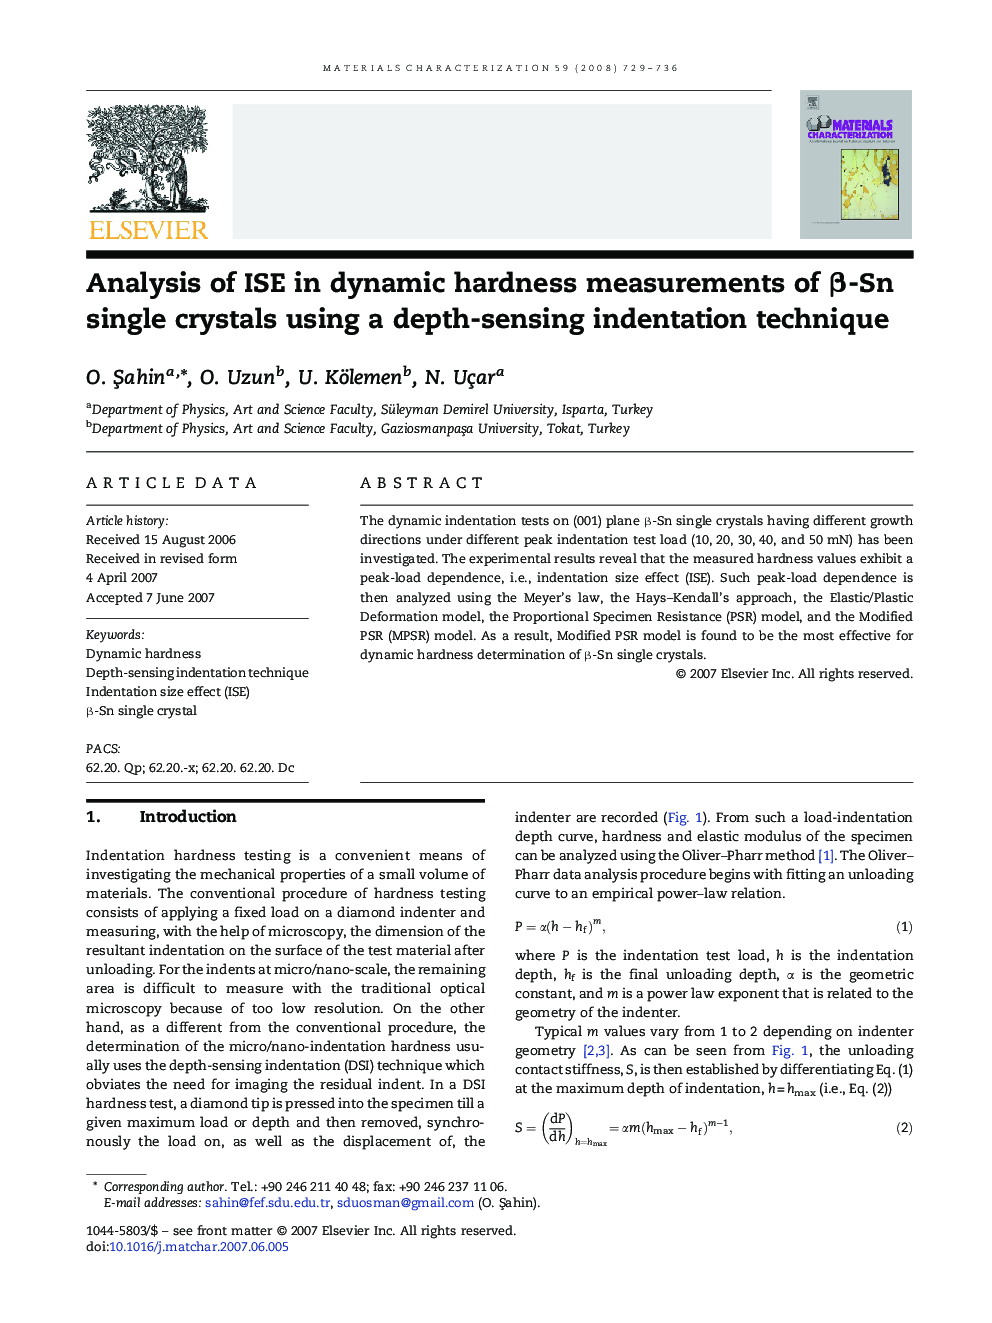 Analysis of ISE in dynamic hardness measurements of β-Sn single crystals using a depth-sensing indentation technique